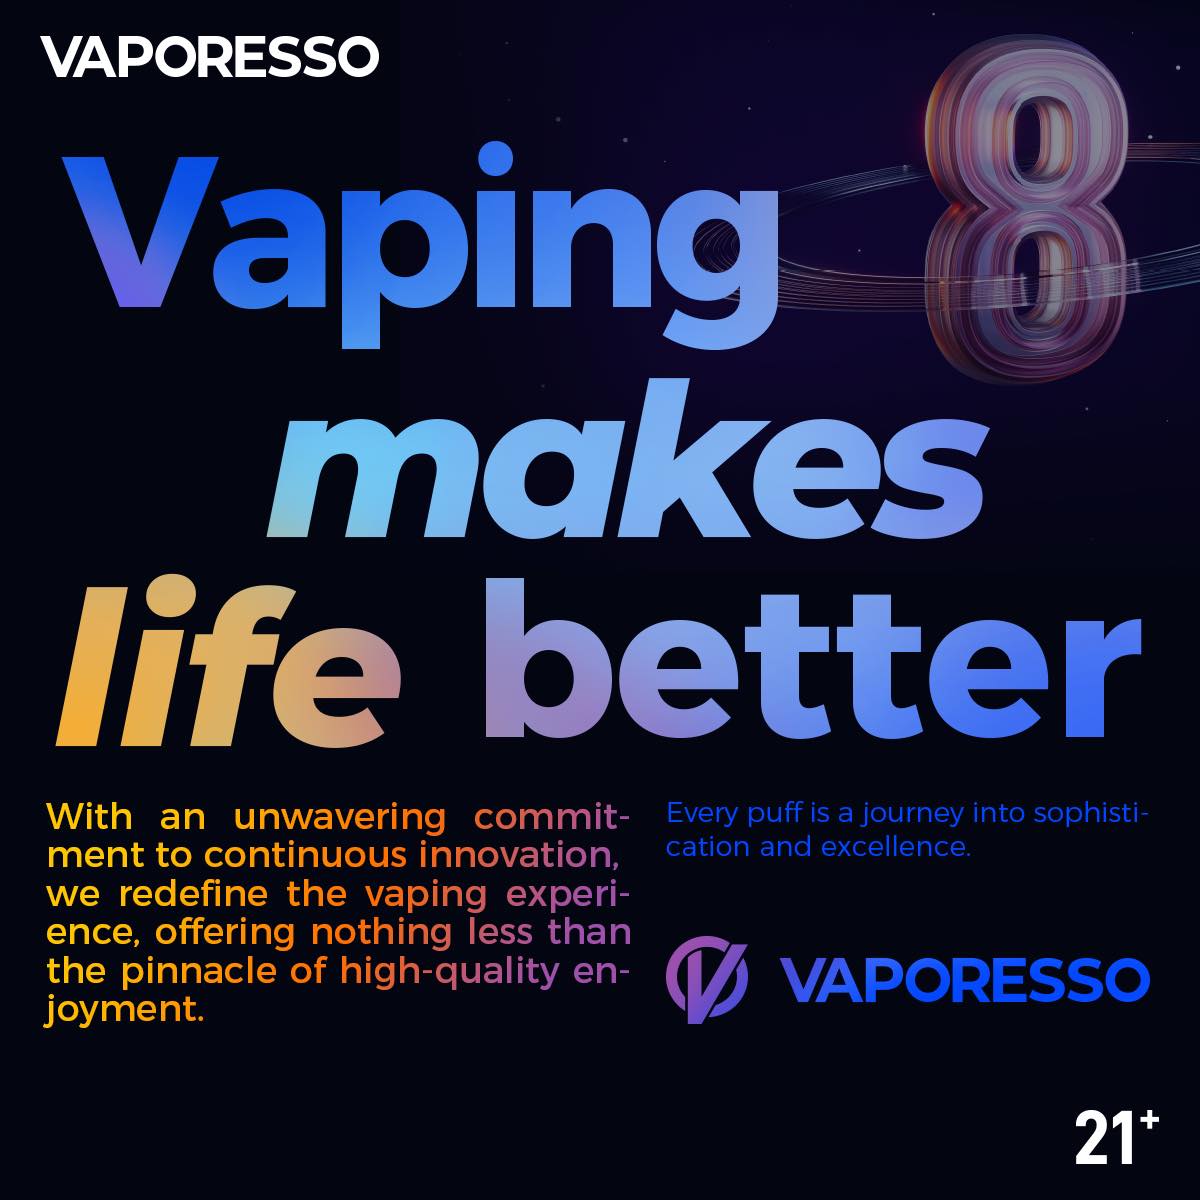 Vaporesso Vaping Products: My Flavorful Journey Through Hits and Misses